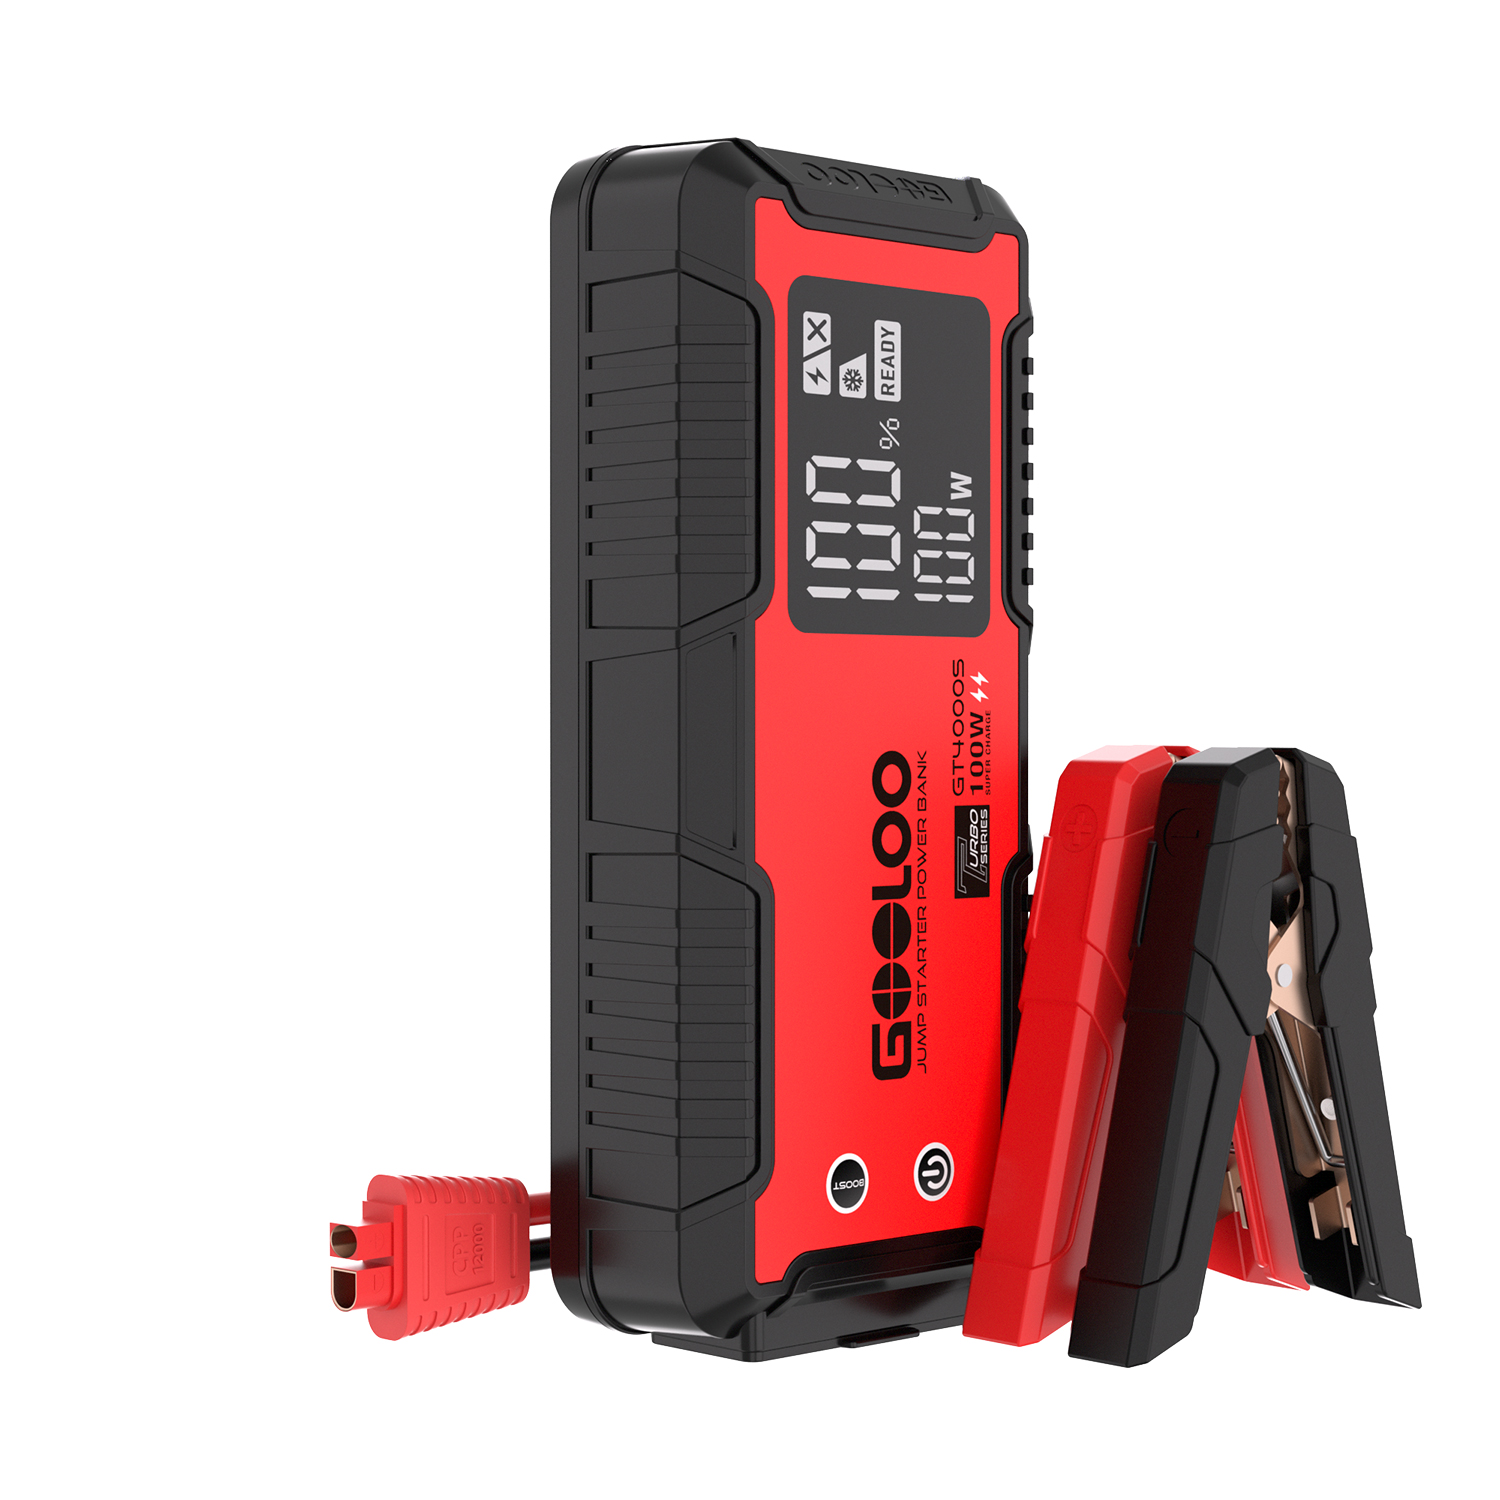 GOOLOO Upgraded GP3000 Jump Starter 3000A Peak Car Starter Up to 9L Gas or  7L Diesel Engine 12V Jump Box Auto Lithium Battery Booster SuperSafe